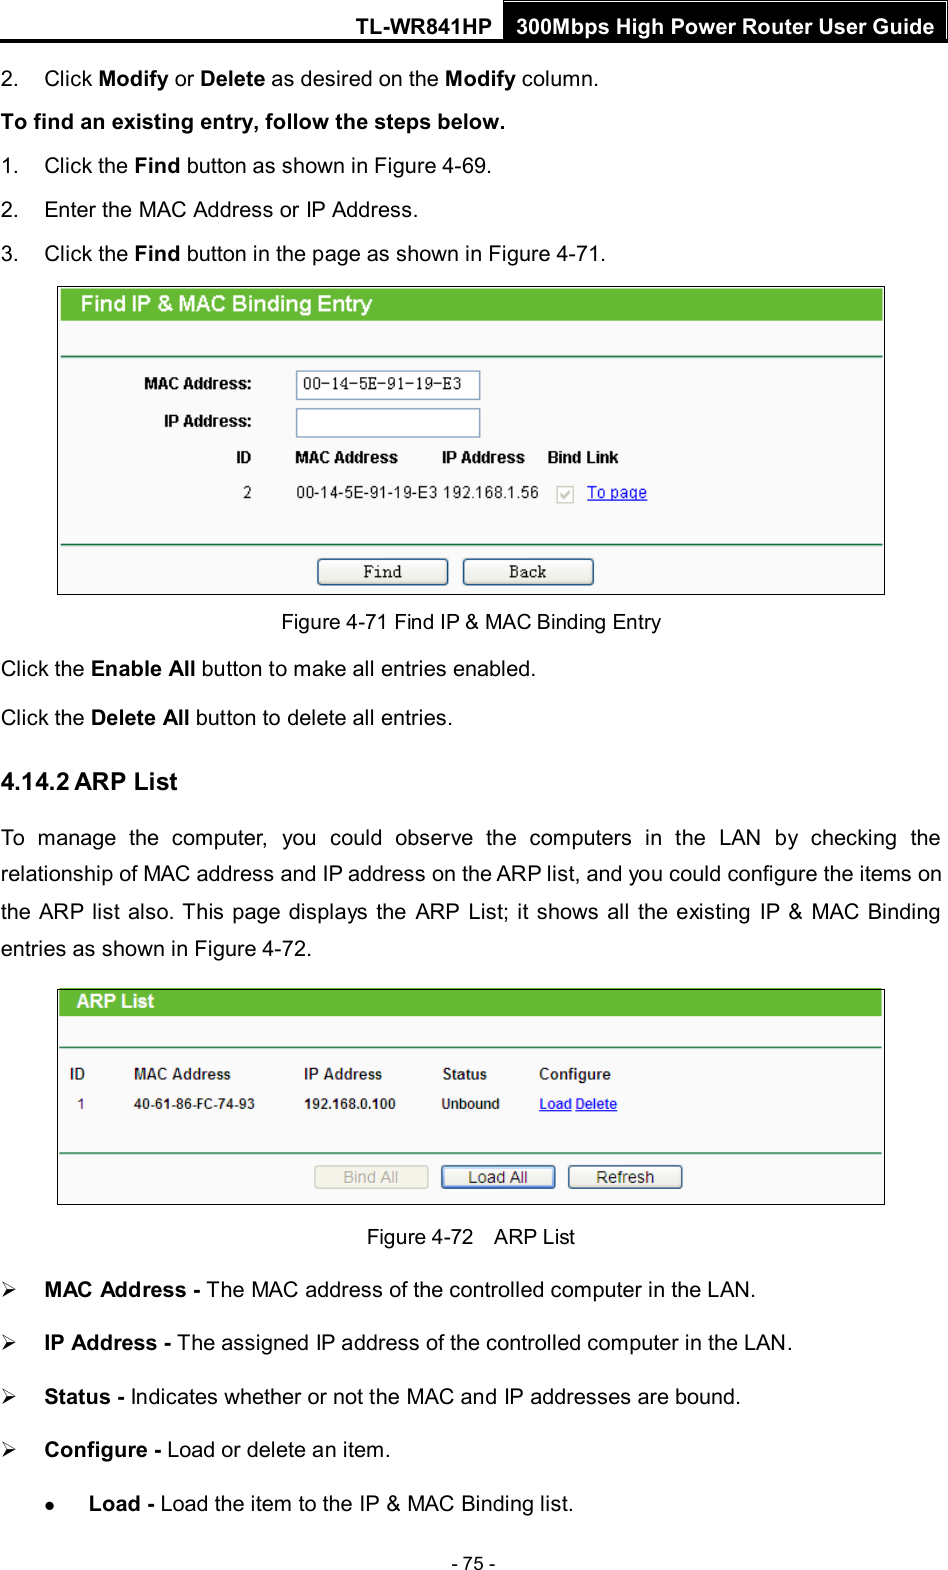 TL-WR841HP 300Mbps High Power Router User Guide  - 75 - 2. Click Modify or Delete as desired on the Modify column.   To find an existing entry, follow the steps below. 1. Click the Find button as shown in Figure 4-69. 2. Enter the MAC Address or IP Address. 3. Click the Find button in the page as shown in Figure 4-71.  Figure 4-71 Find IP &amp; MAC Binding Entry Click the Enable All button to make all entries enabled. Click the Delete All button to delete all entries. 4.14.2 ARP List To manage the computer, you could observe the computers in the LAN by checking the relationship of MAC address and IP address on the ARP list, and you could configure the items on the ARP list also. This page displays the ARP List; it shows all the existing IP &amp; MAC Binding entries as shown in Figure 4-72.    Figure 4-72  ARP List  MAC Address - The MAC address of the controlled computer in the LAN.    IP Address - The assigned IP address of the controlled computer in the LAN.    Status - Indicates whether or not the MAC and IP addresses are bound.  Configure - Load or delete an item.    Load - Load the item to the IP &amp; MAC Binding list.   